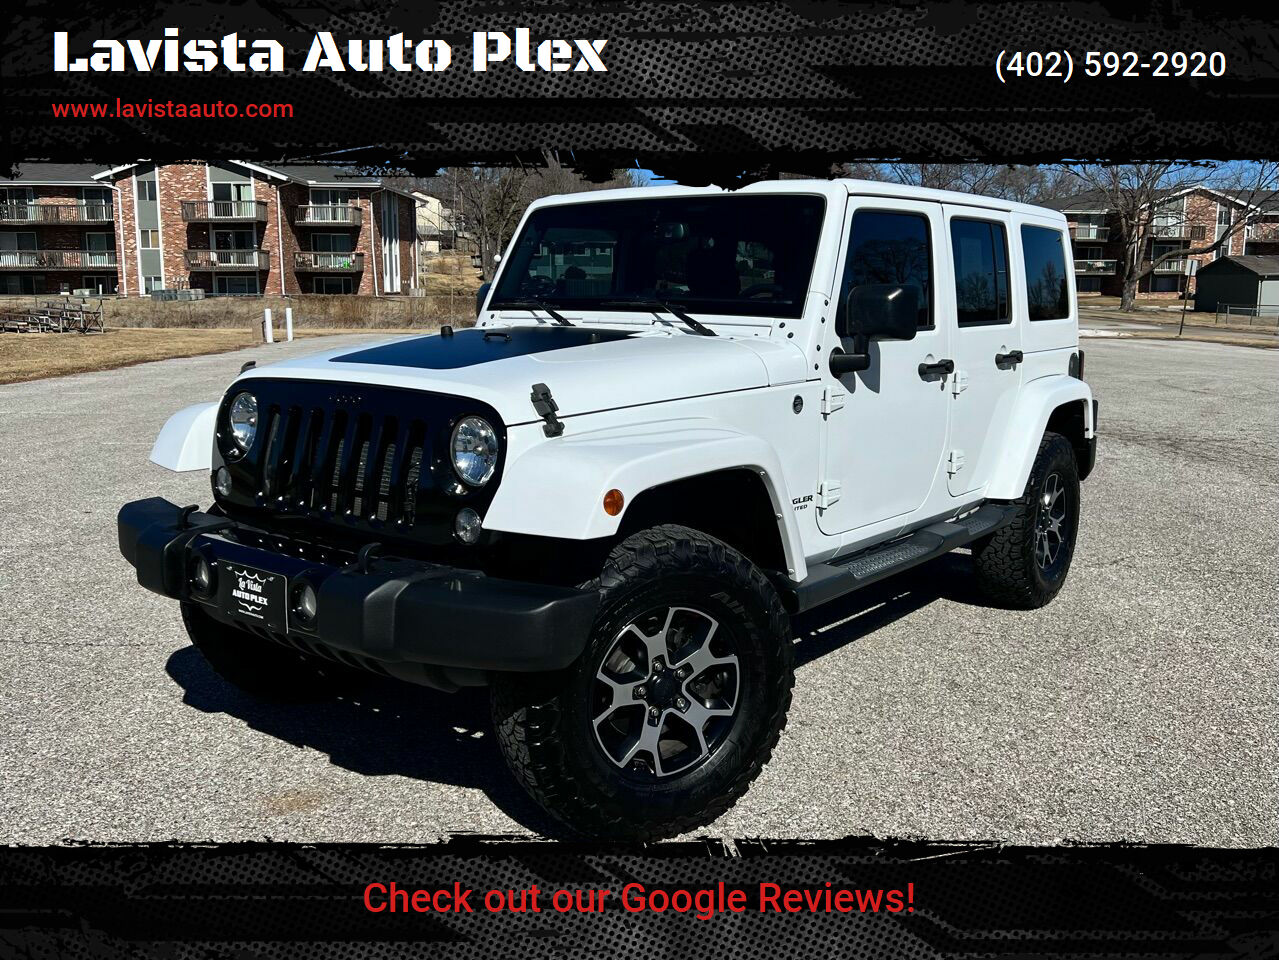 Jeep Wrangler Unlimited For Sale In Council Bluffs, IA ®